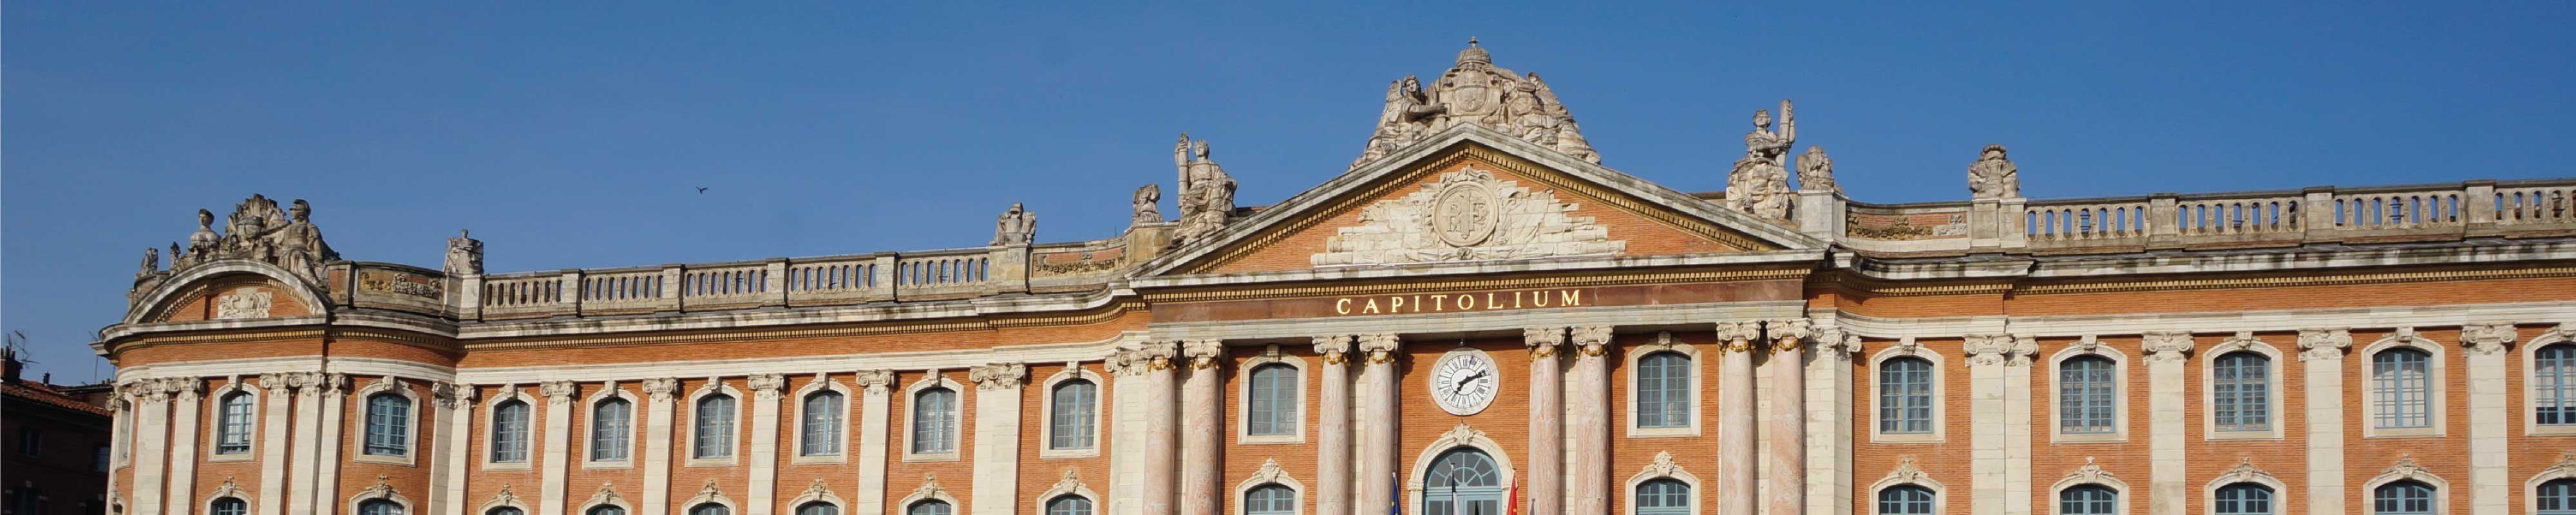 Luggage Storage | Capitole in Toulouse - Nannybag